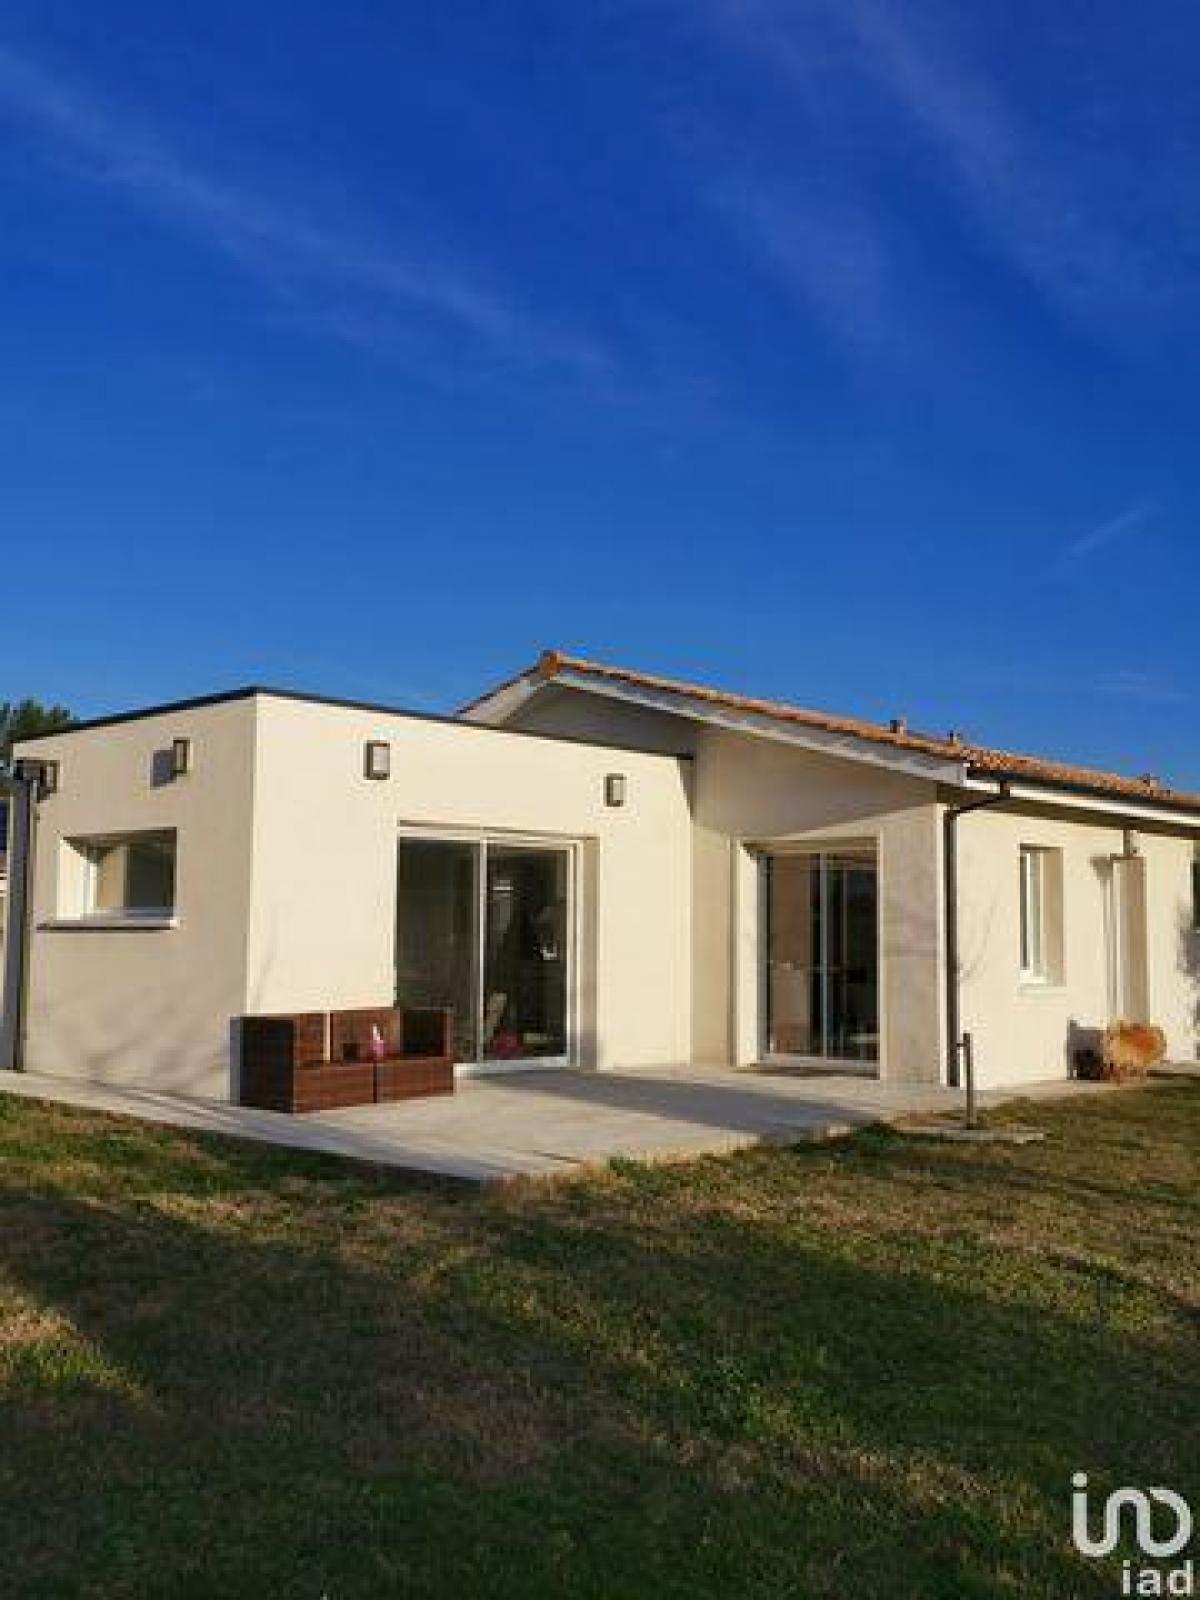 Picture of Home For Sale in Audenge, Aquitaine, France